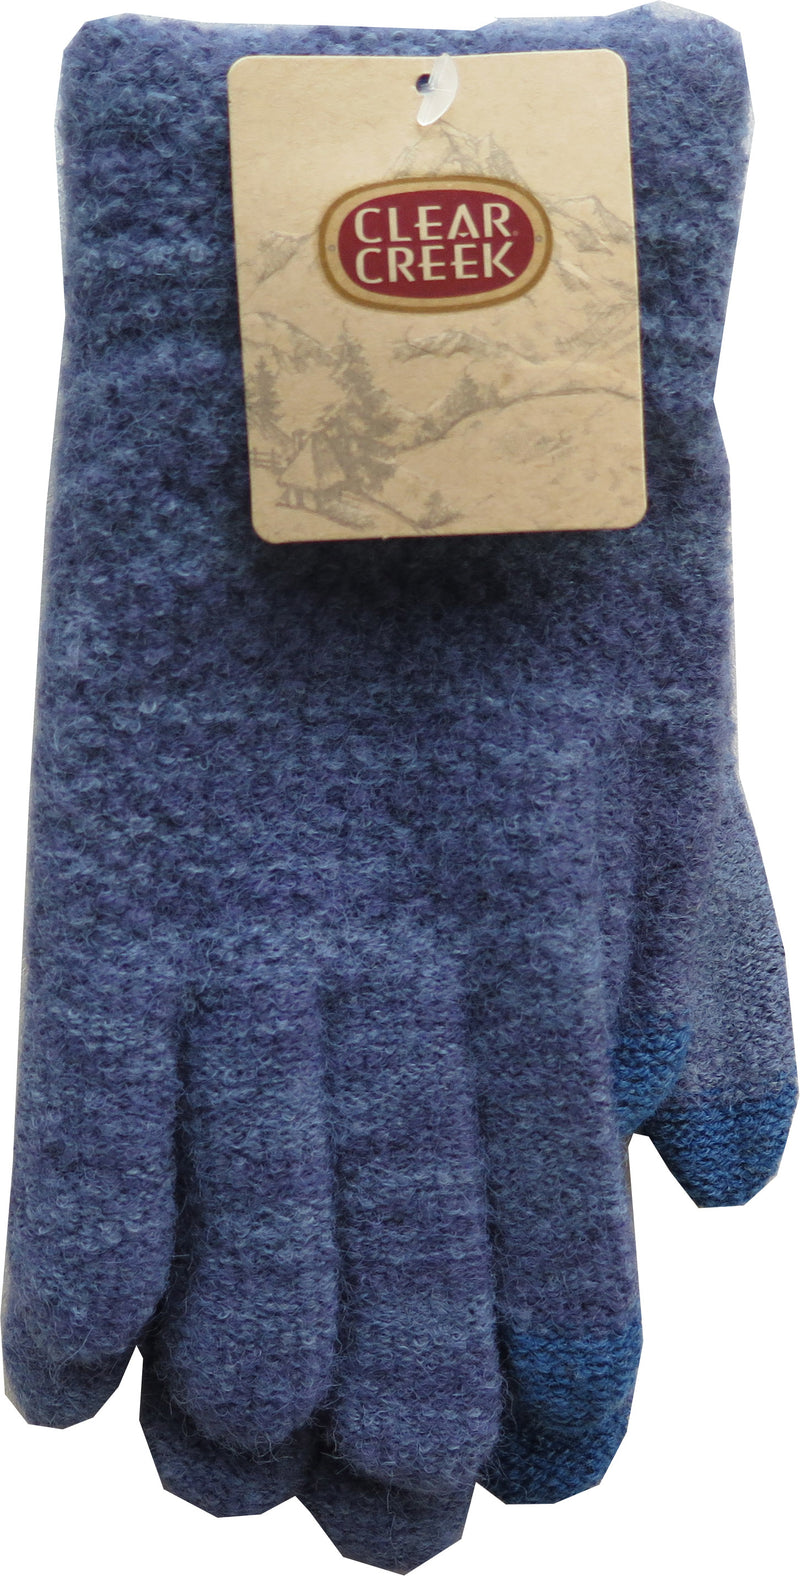 Clear Creek Women's Soft Cable Knit Device Touchscreen Sensitive Winter Gloves